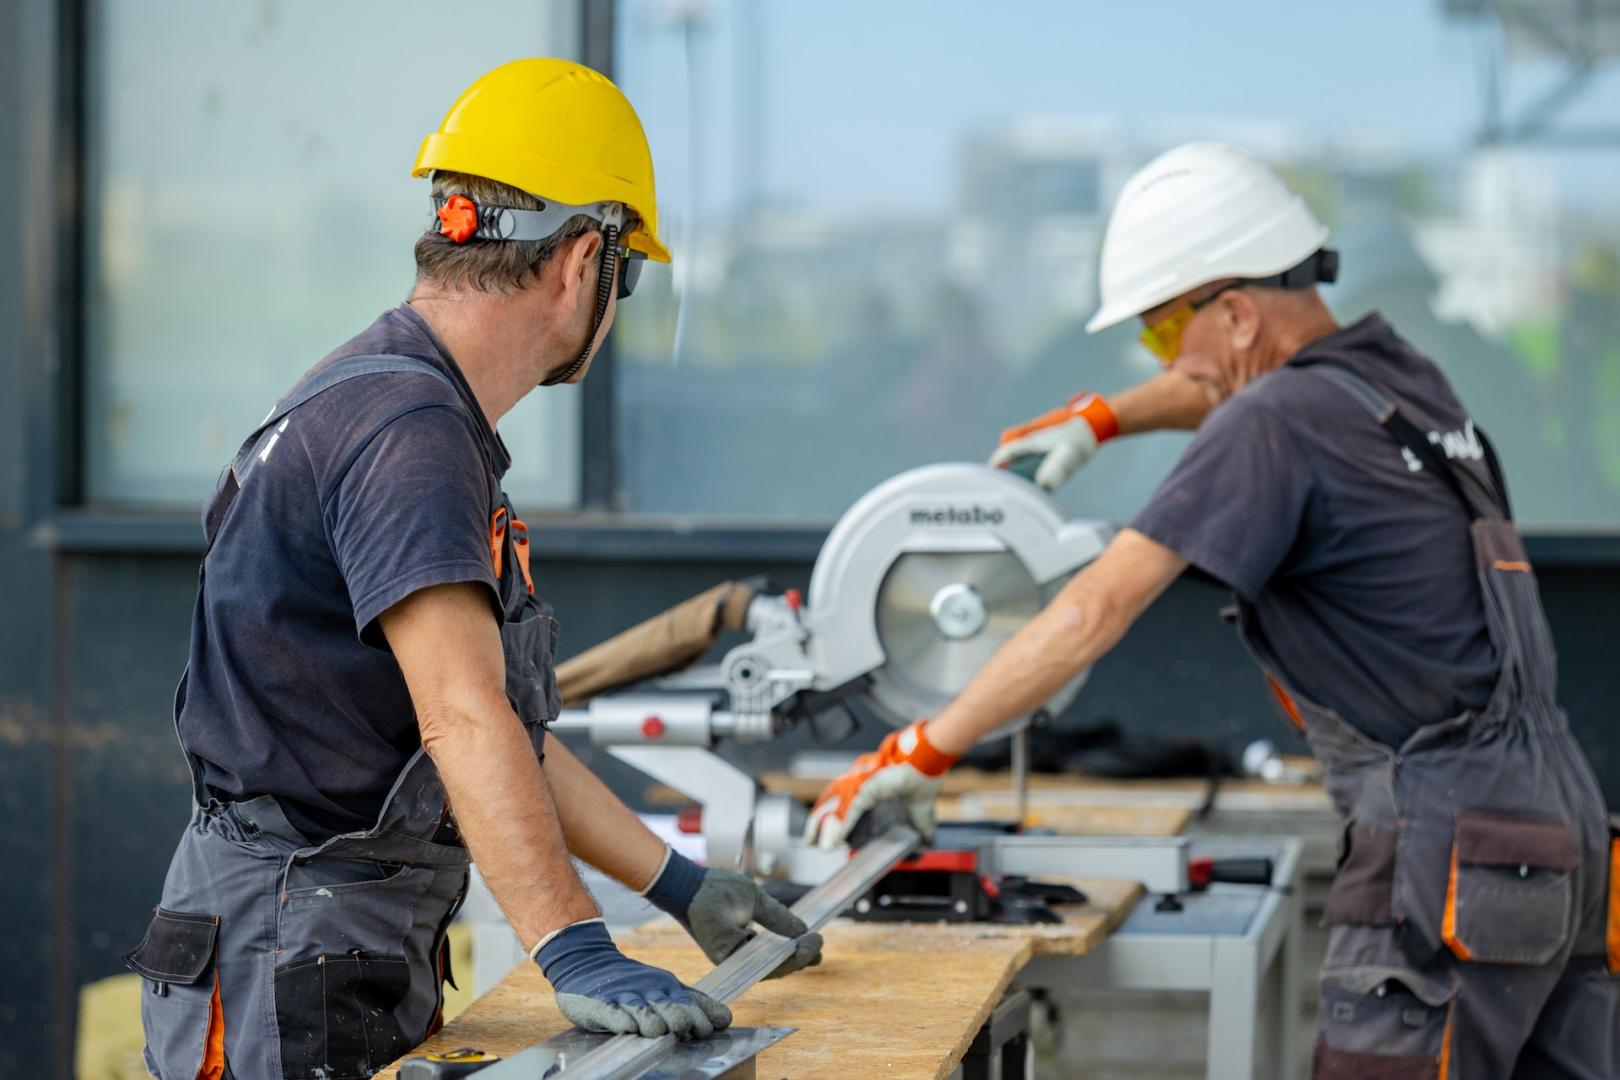 Two workers in hard hats cutting a metal beam with a circular saw